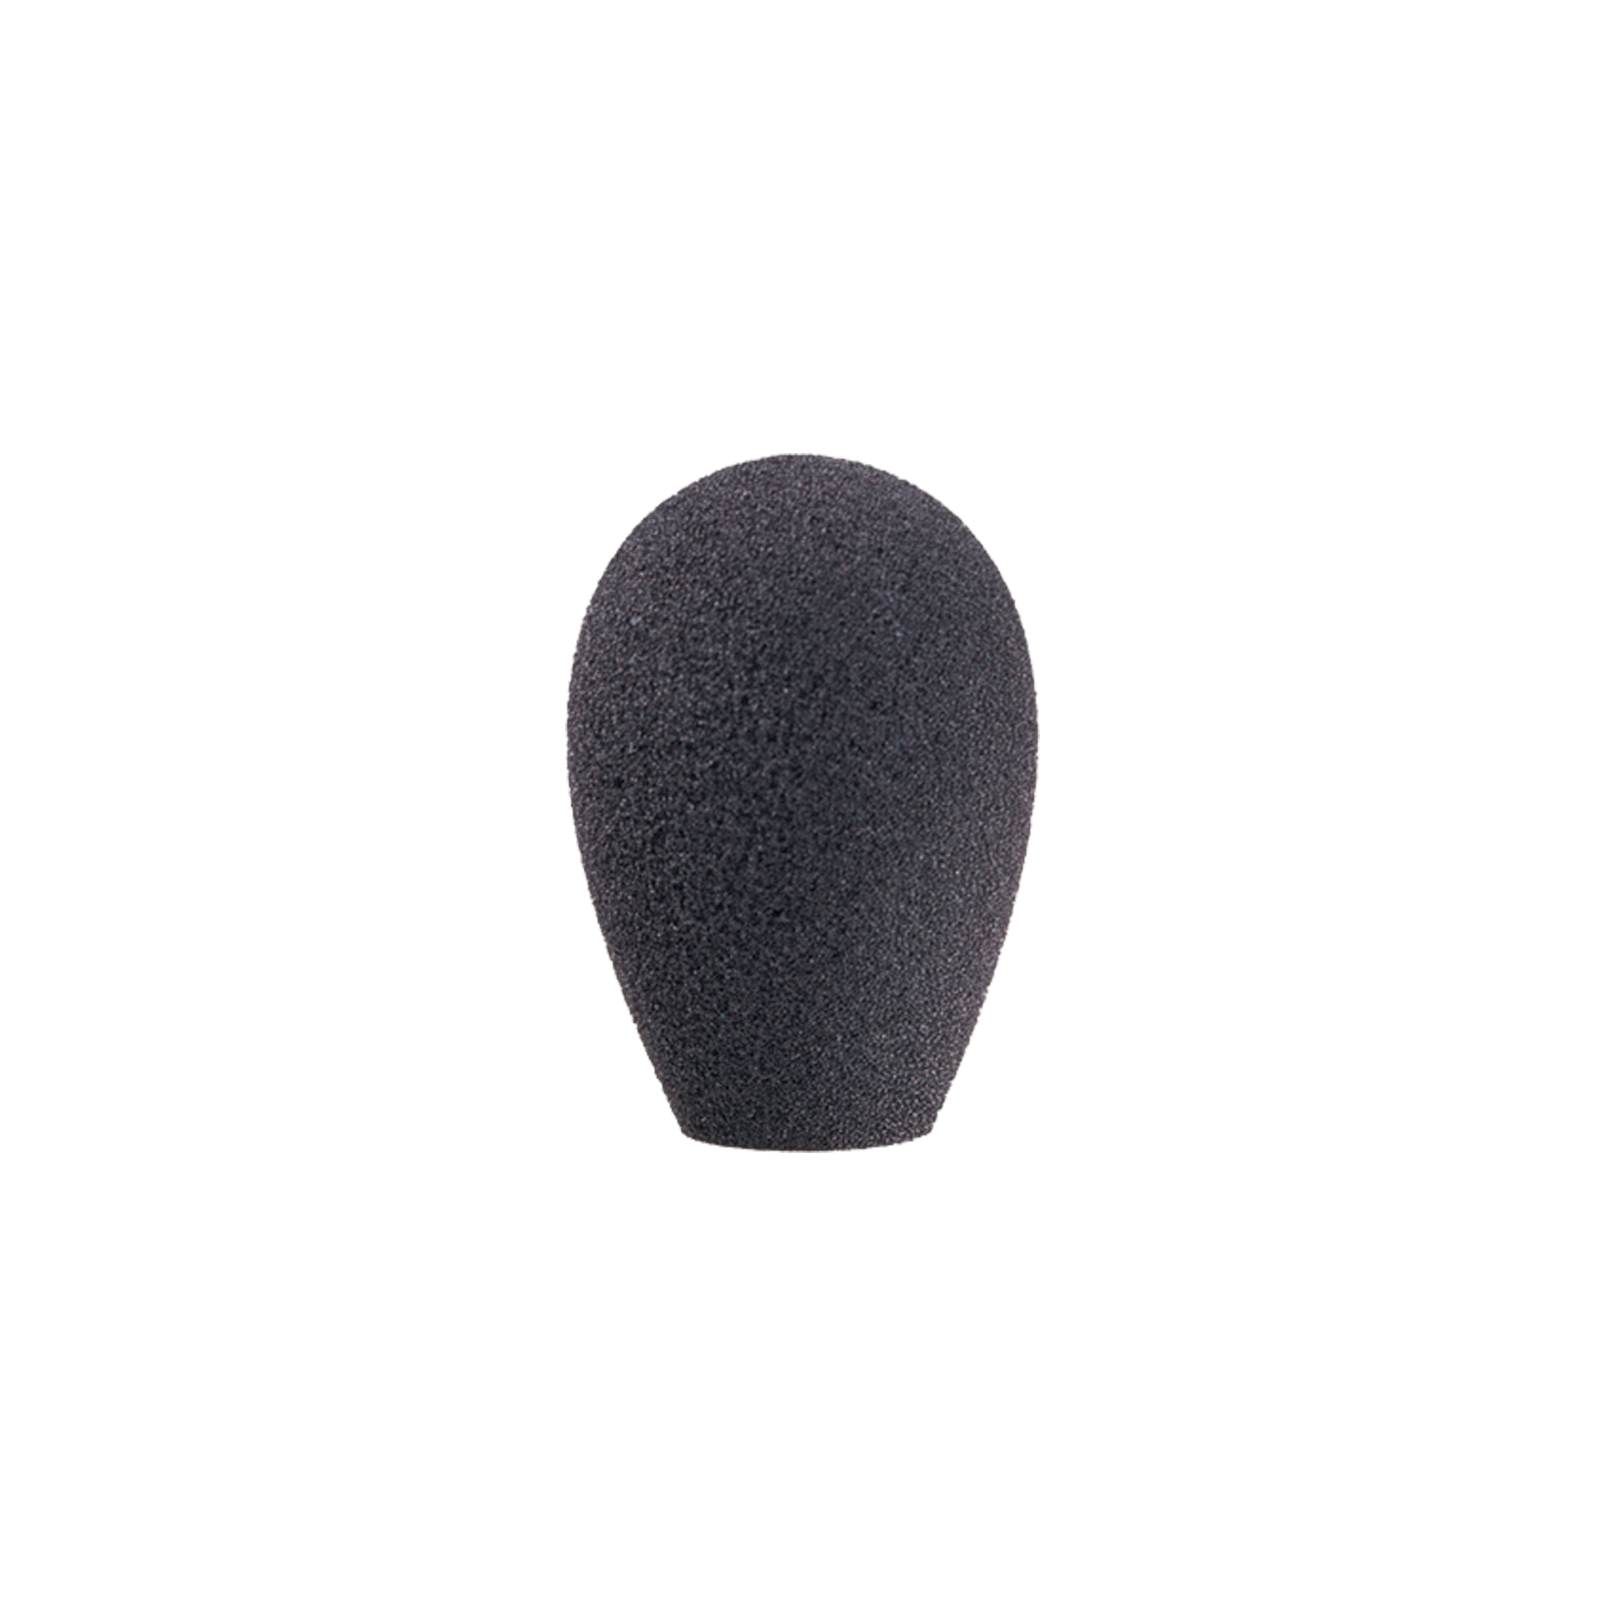 W32 - Black - Windscreen for use with microphones approximately 50mm (2") in diameter, such as the CK61 ULS - Hero